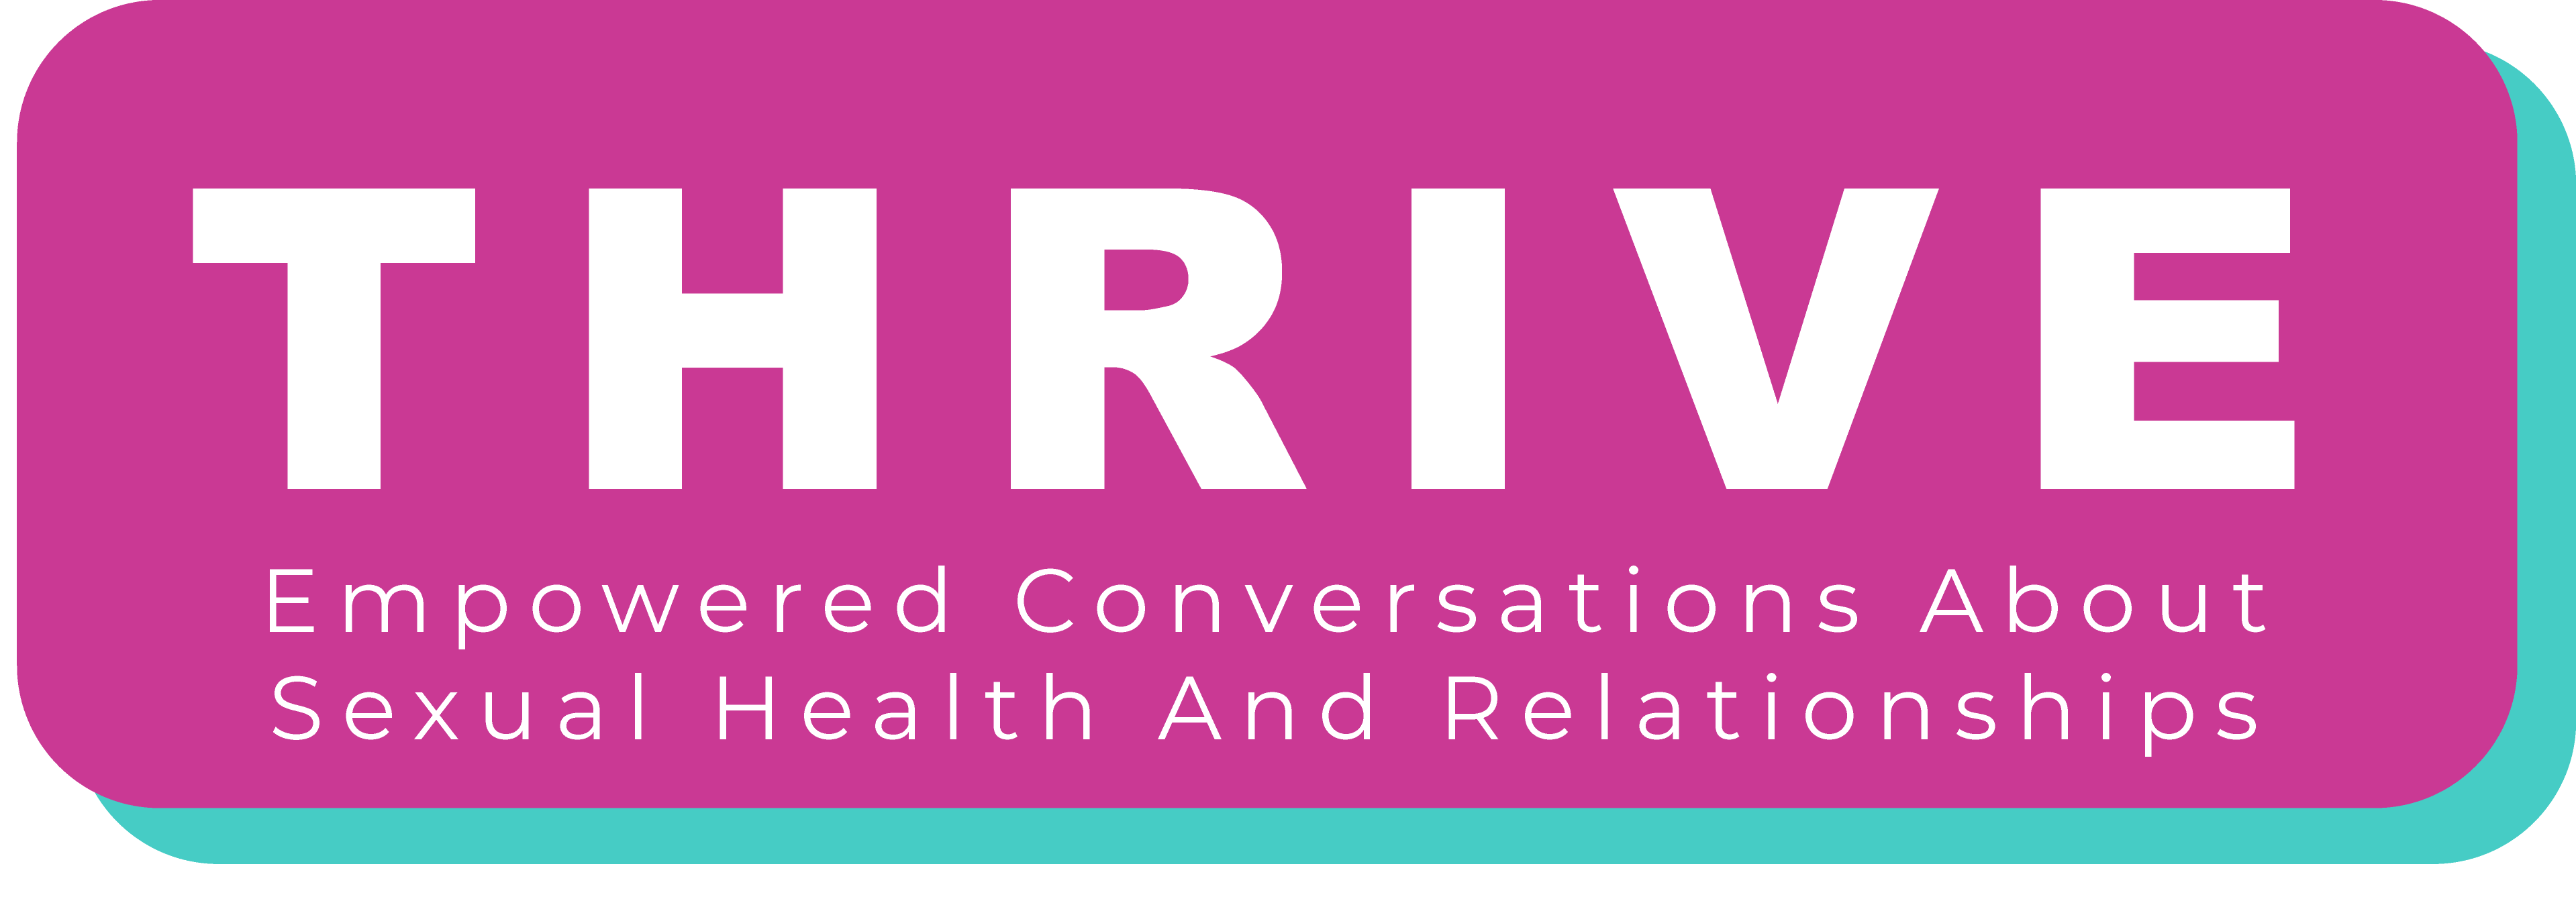 Pink box with white text that says "THRIVE: Empowered Conversations about Sexual Health and Relationships"